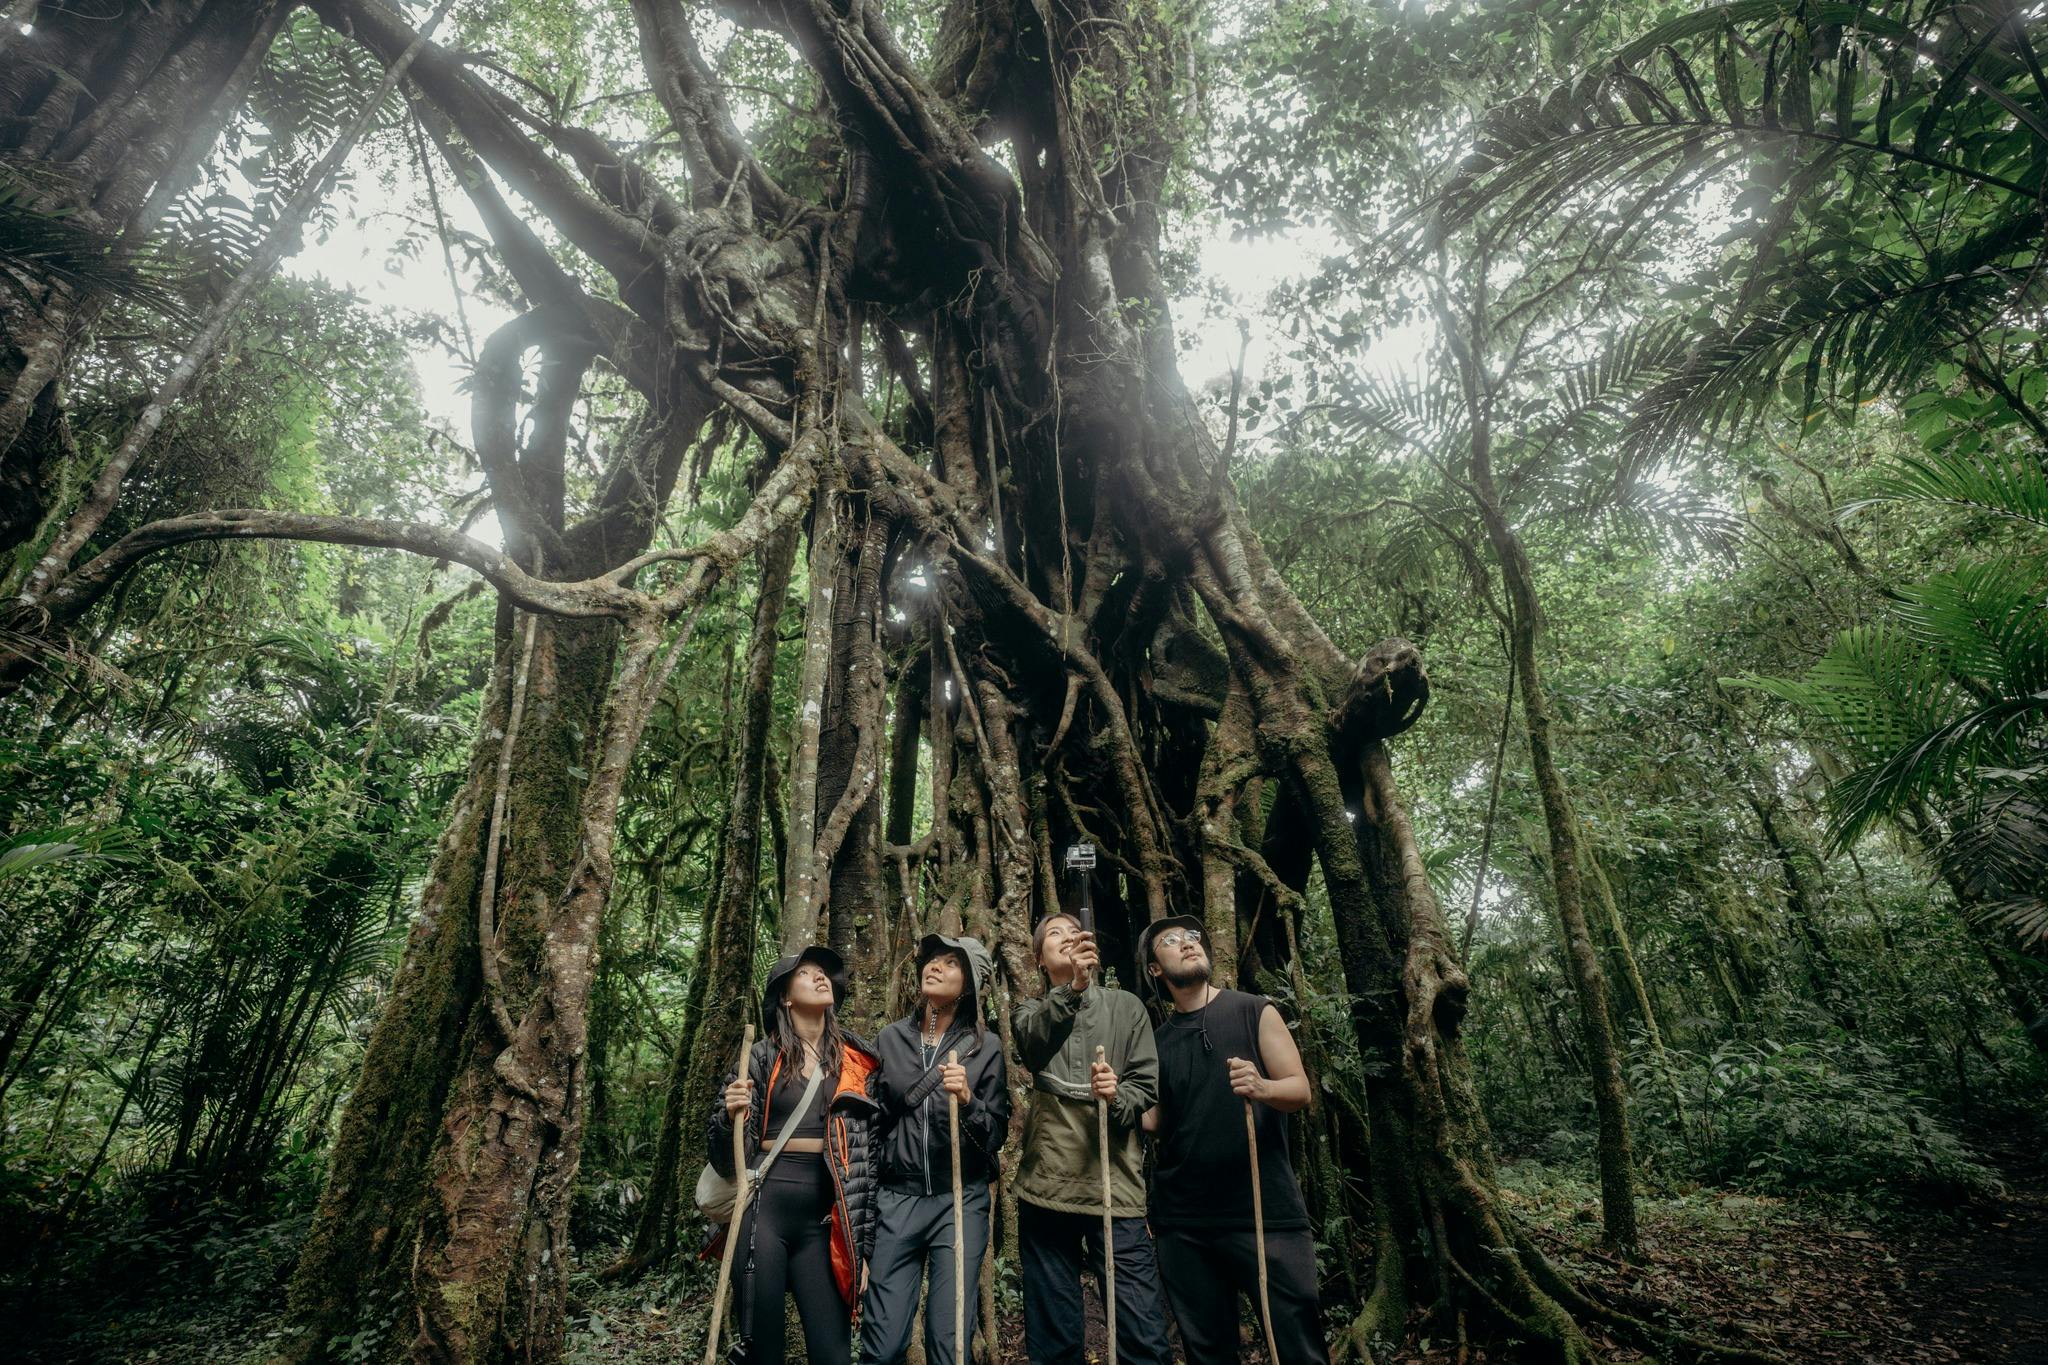 Trek to ancient rainforests with centuries' old trees in Munduk